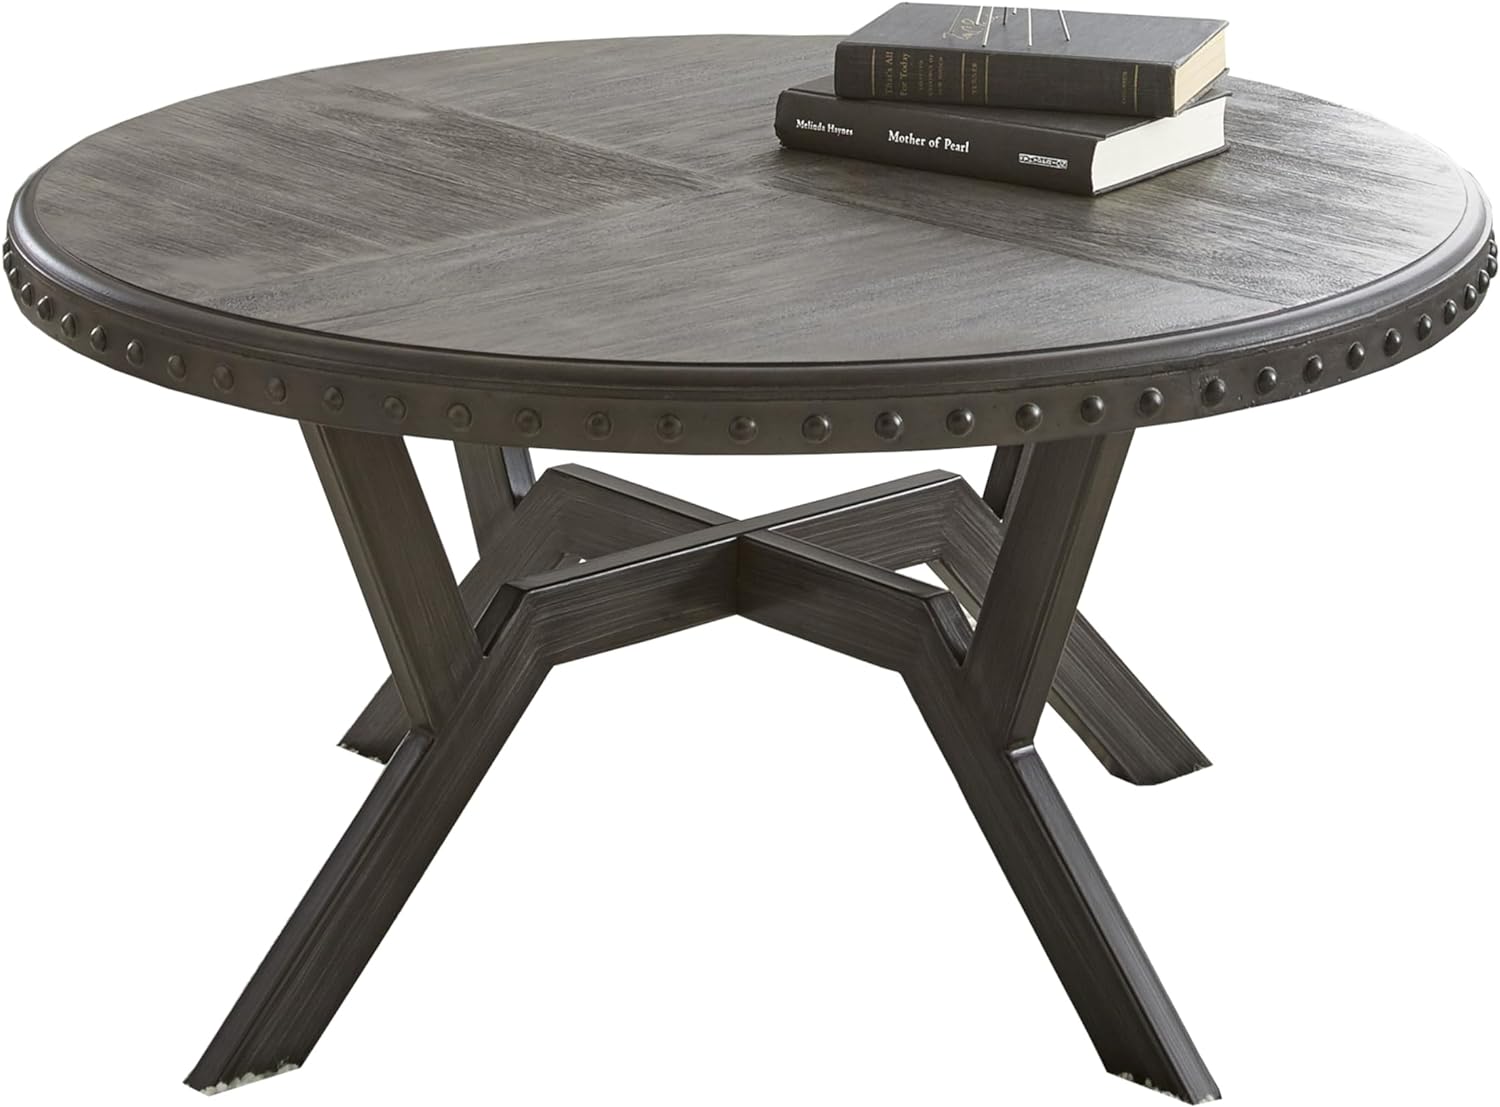 Rustic Alamo Round Cocktail Coffee Table With Nailhead Trim in Weathered Grey